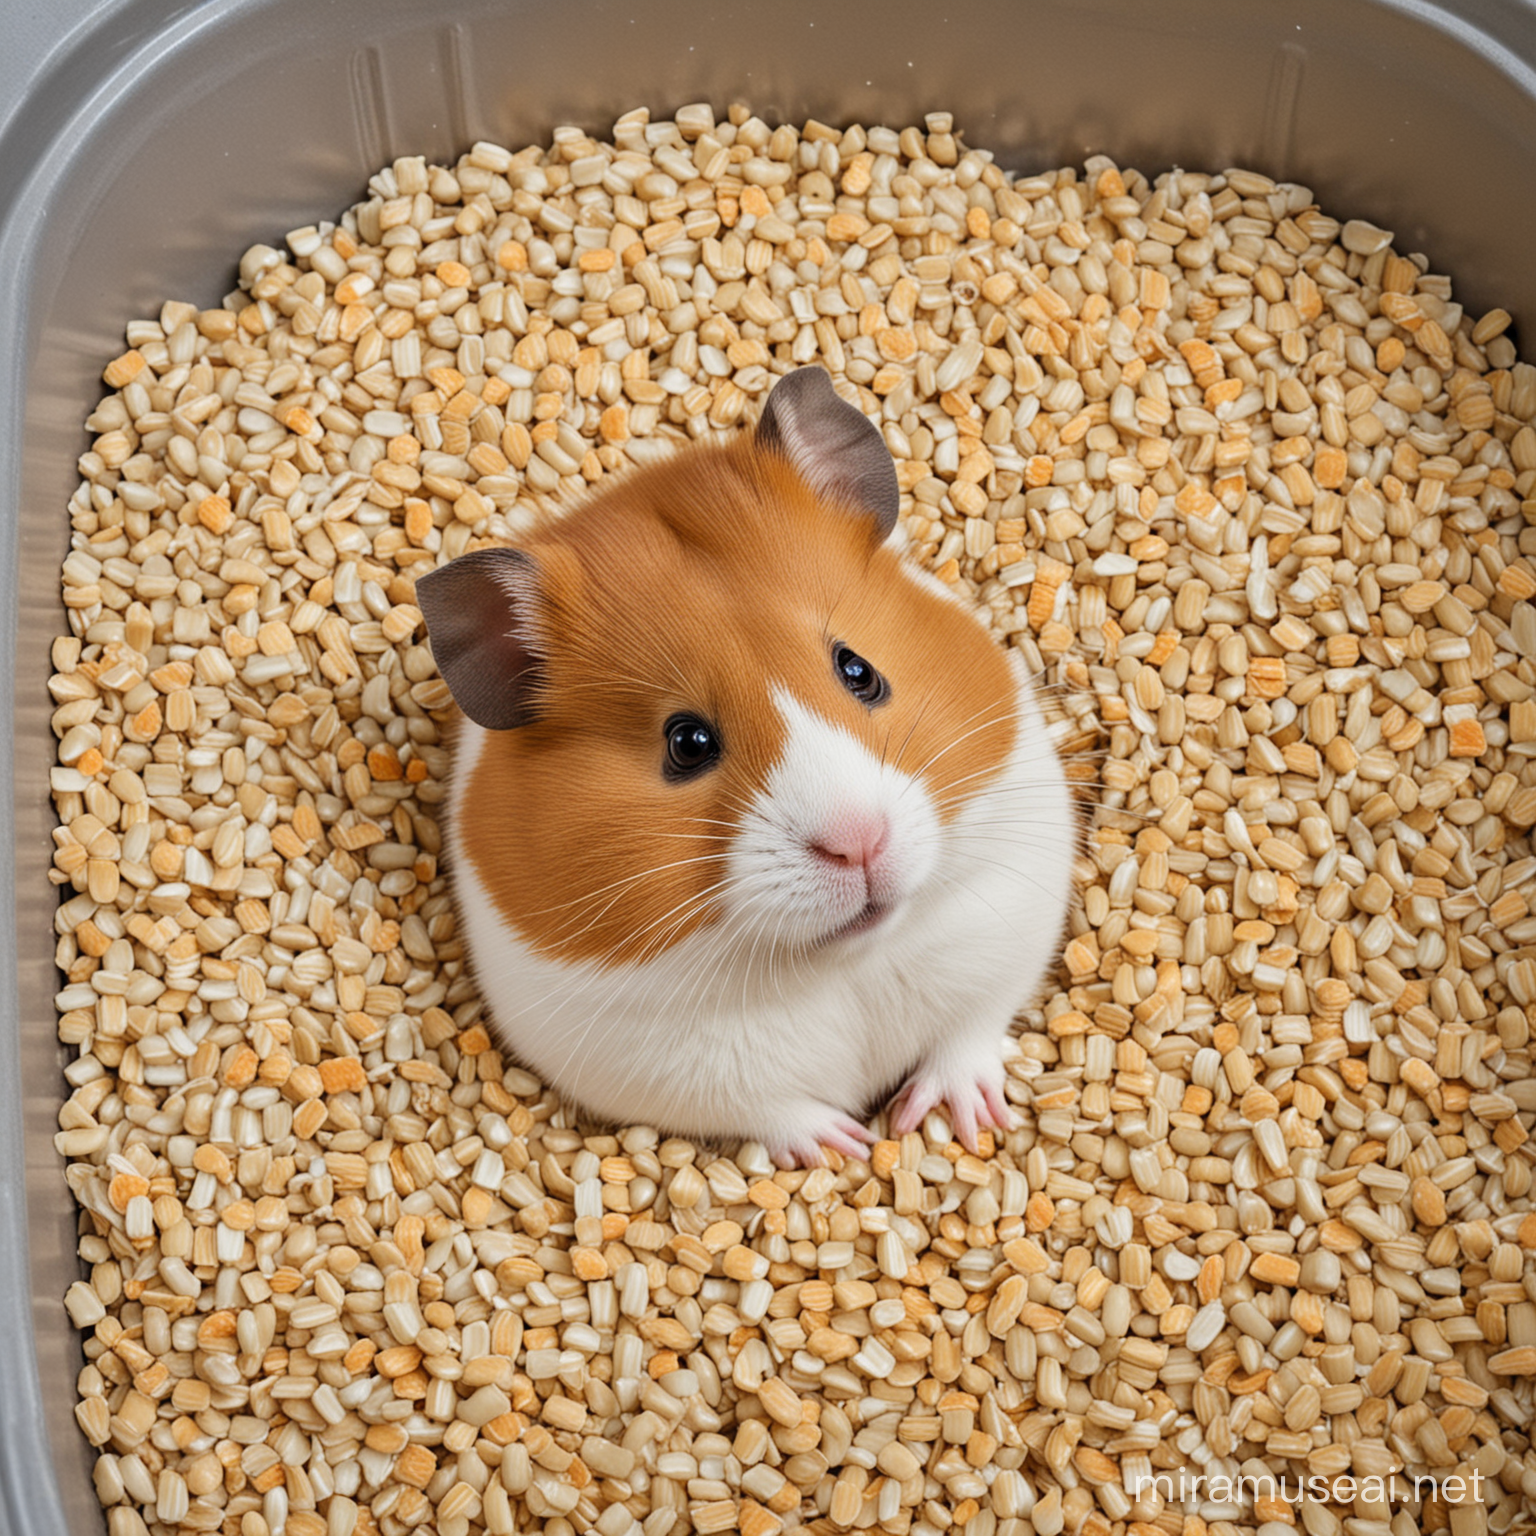 When my daughter's beloved hamster Ginger died, I popped him in the food recycling bin under a load of rice.